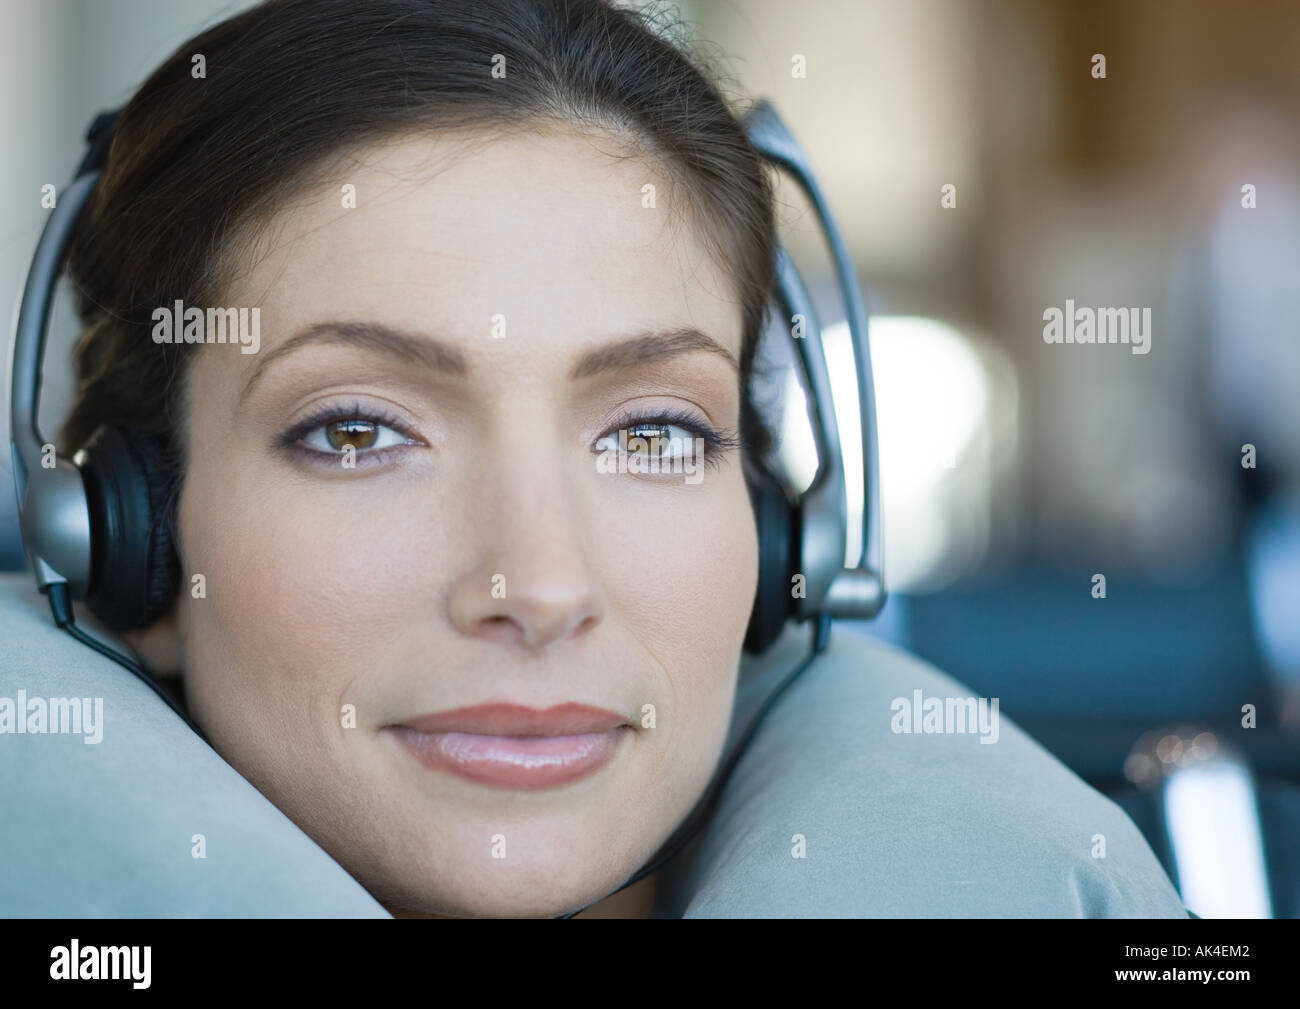 Woman wearing headphones and using neck pillow, close-up Stock Photo